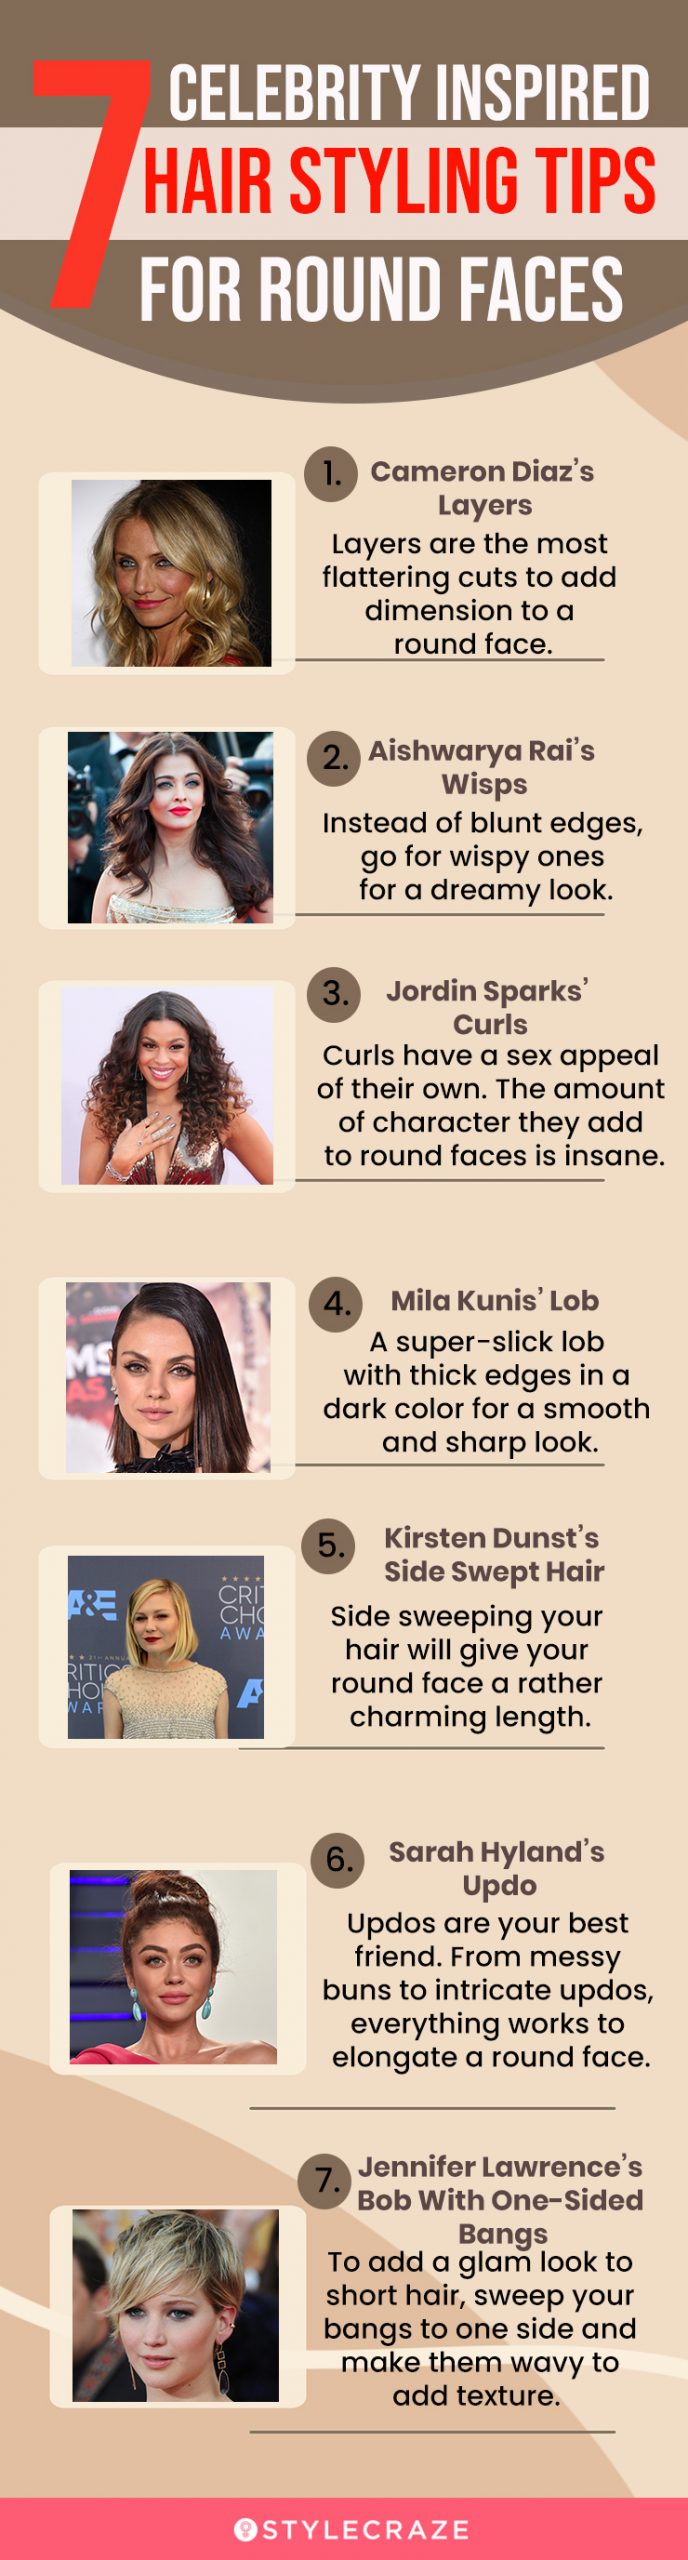 7 celebrity inspired hair styling tips for round faces (infographic)